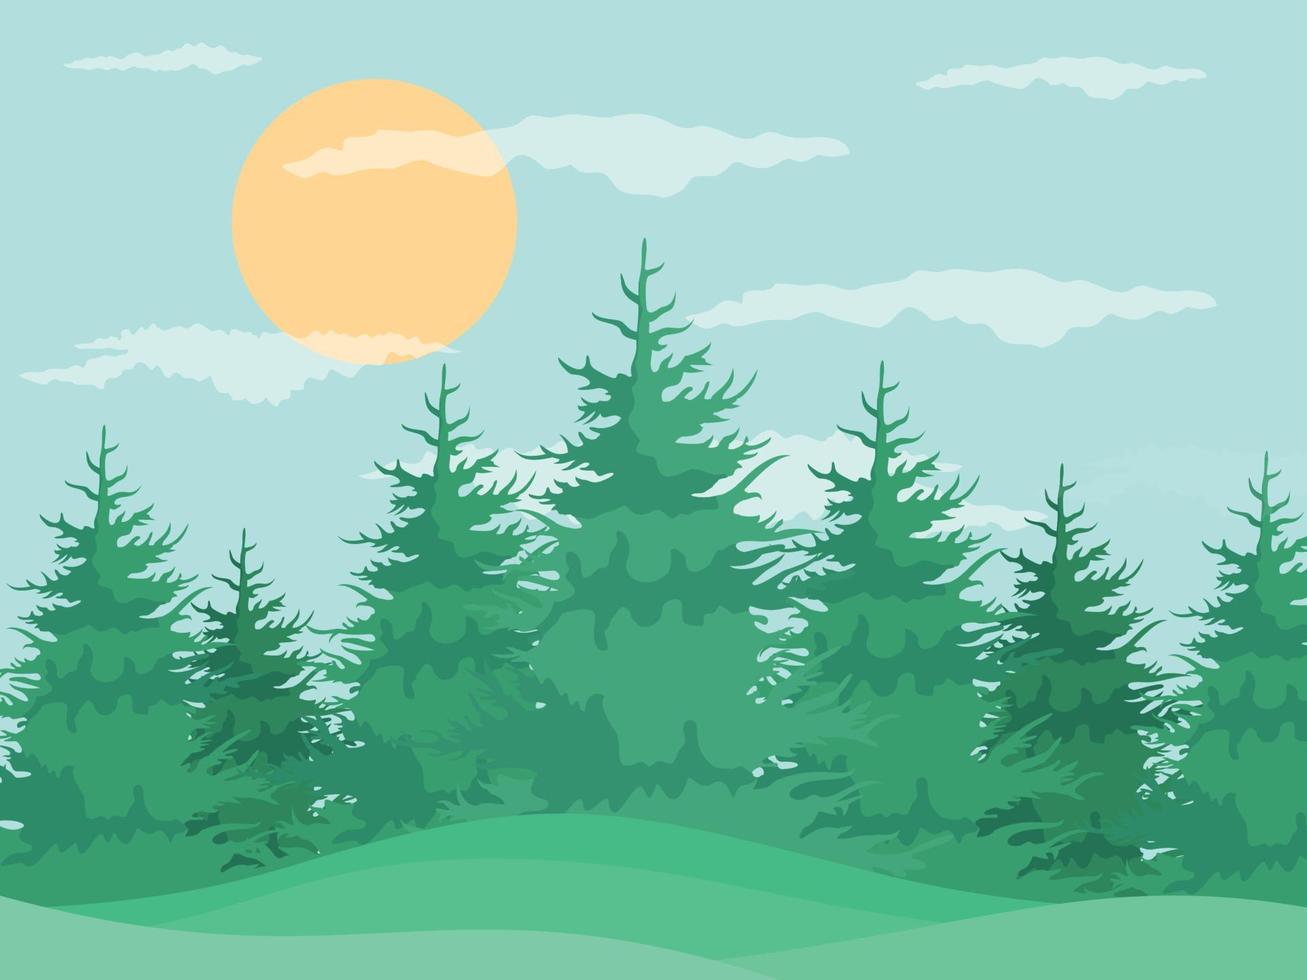 Summer in a pine forest. Vector illustration